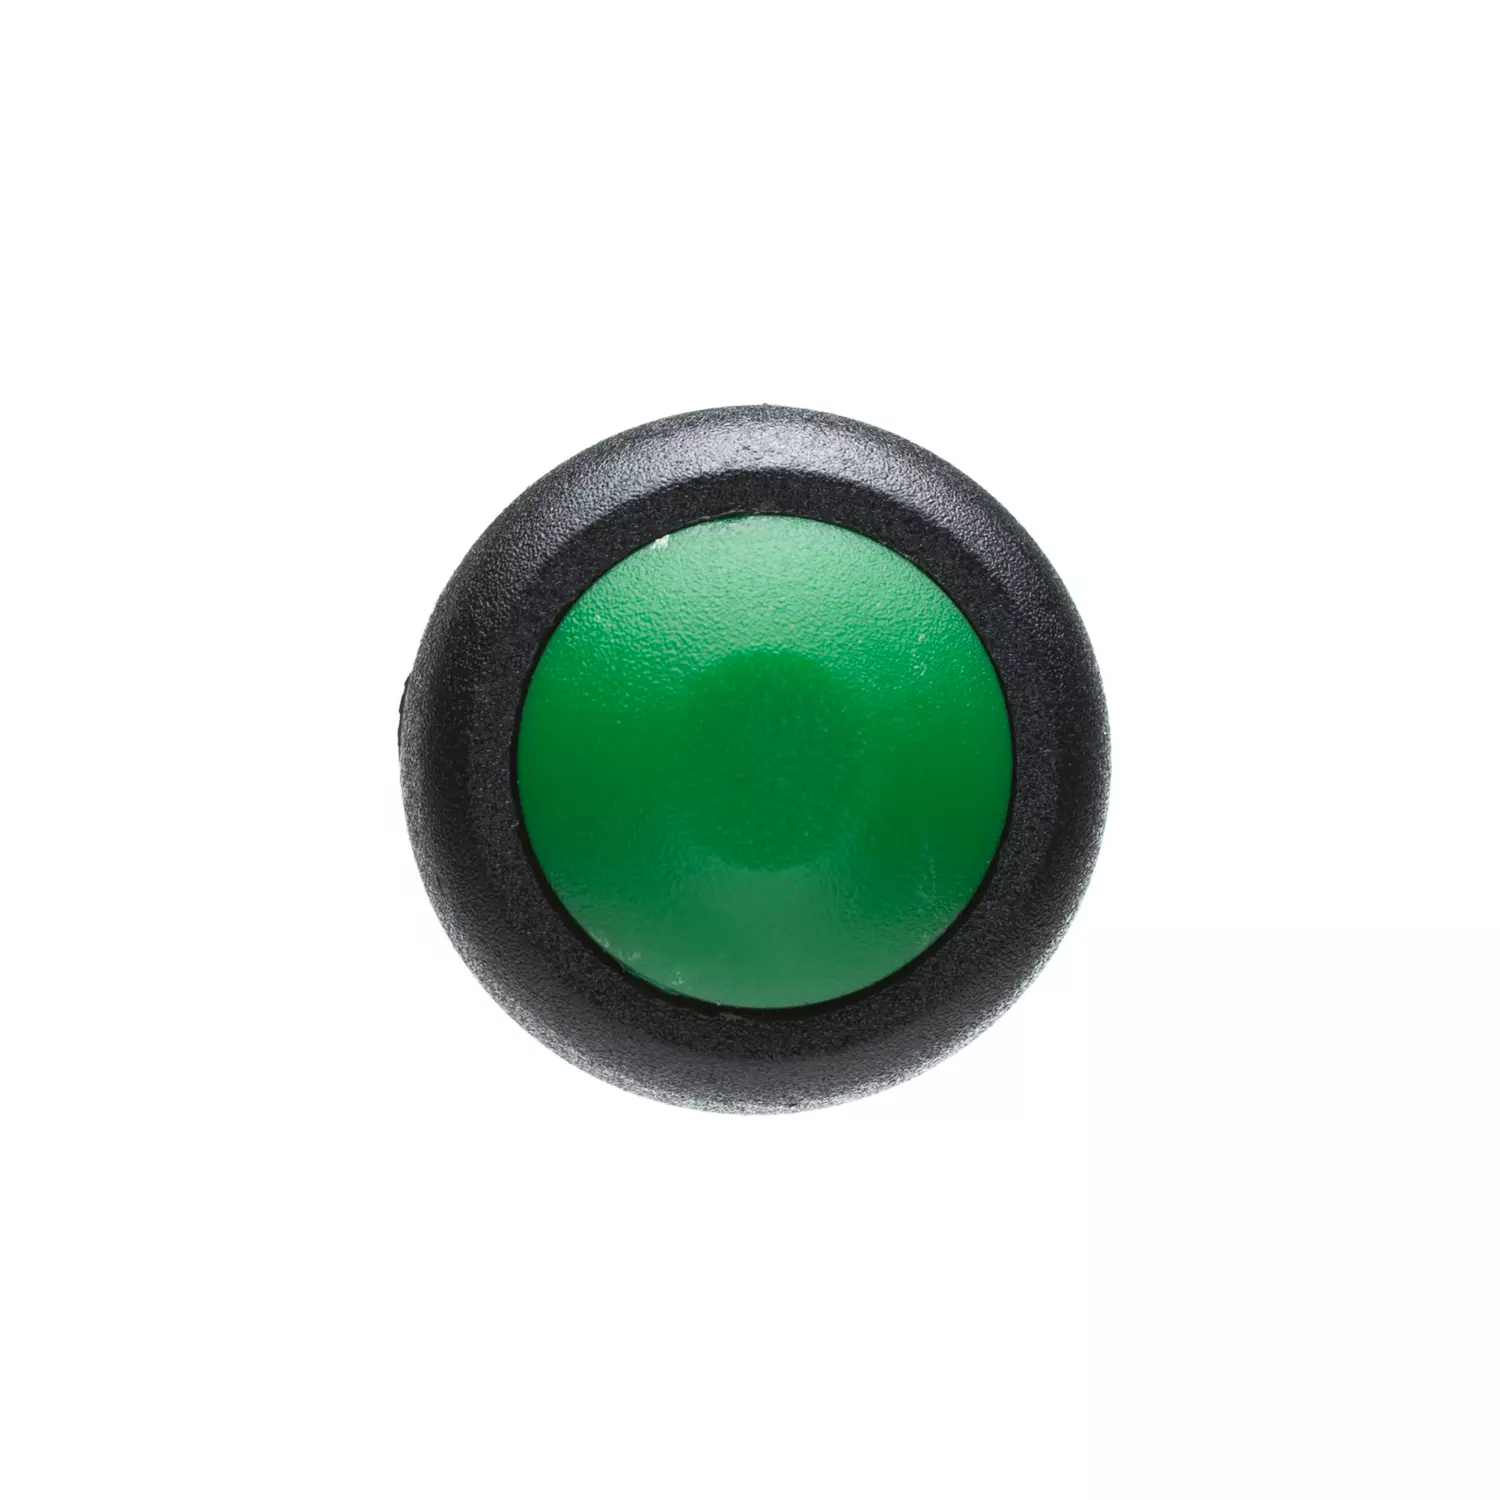 Photo of 12mm Momentary Push Button Dome - Green